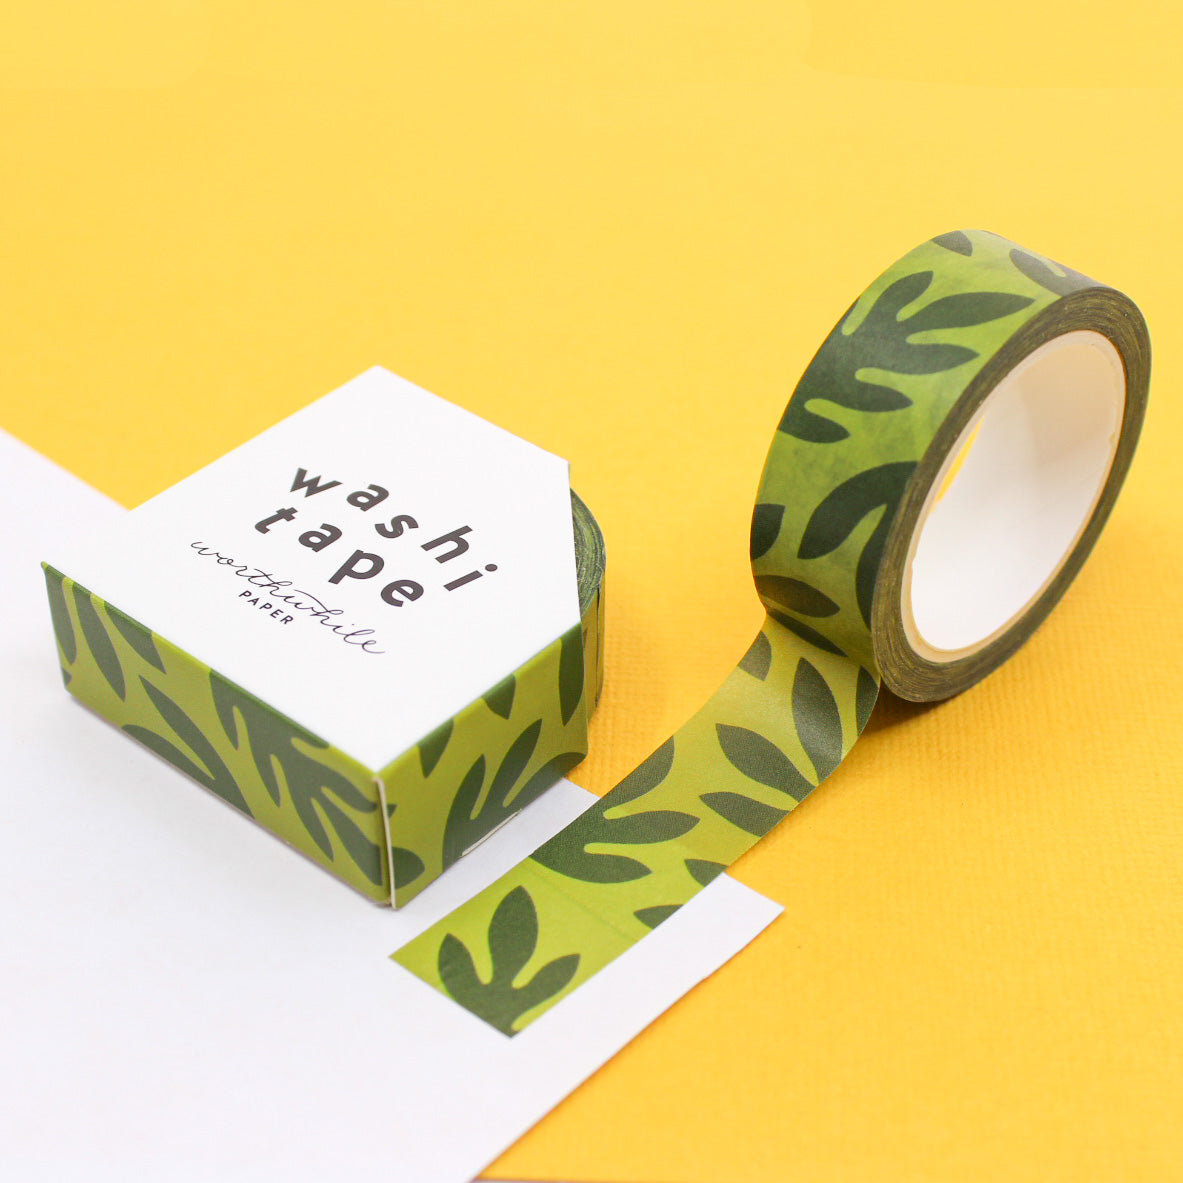 Monochrome Lush Leaves Motif Washi Tape showcasing a delicate pattern of intricate foliage in a sleek and timeless design, perfect for an elegant touch in your creative projects or planners. This tape is from Worthwhile paper and sold at BBB Supplies Craft Shop.